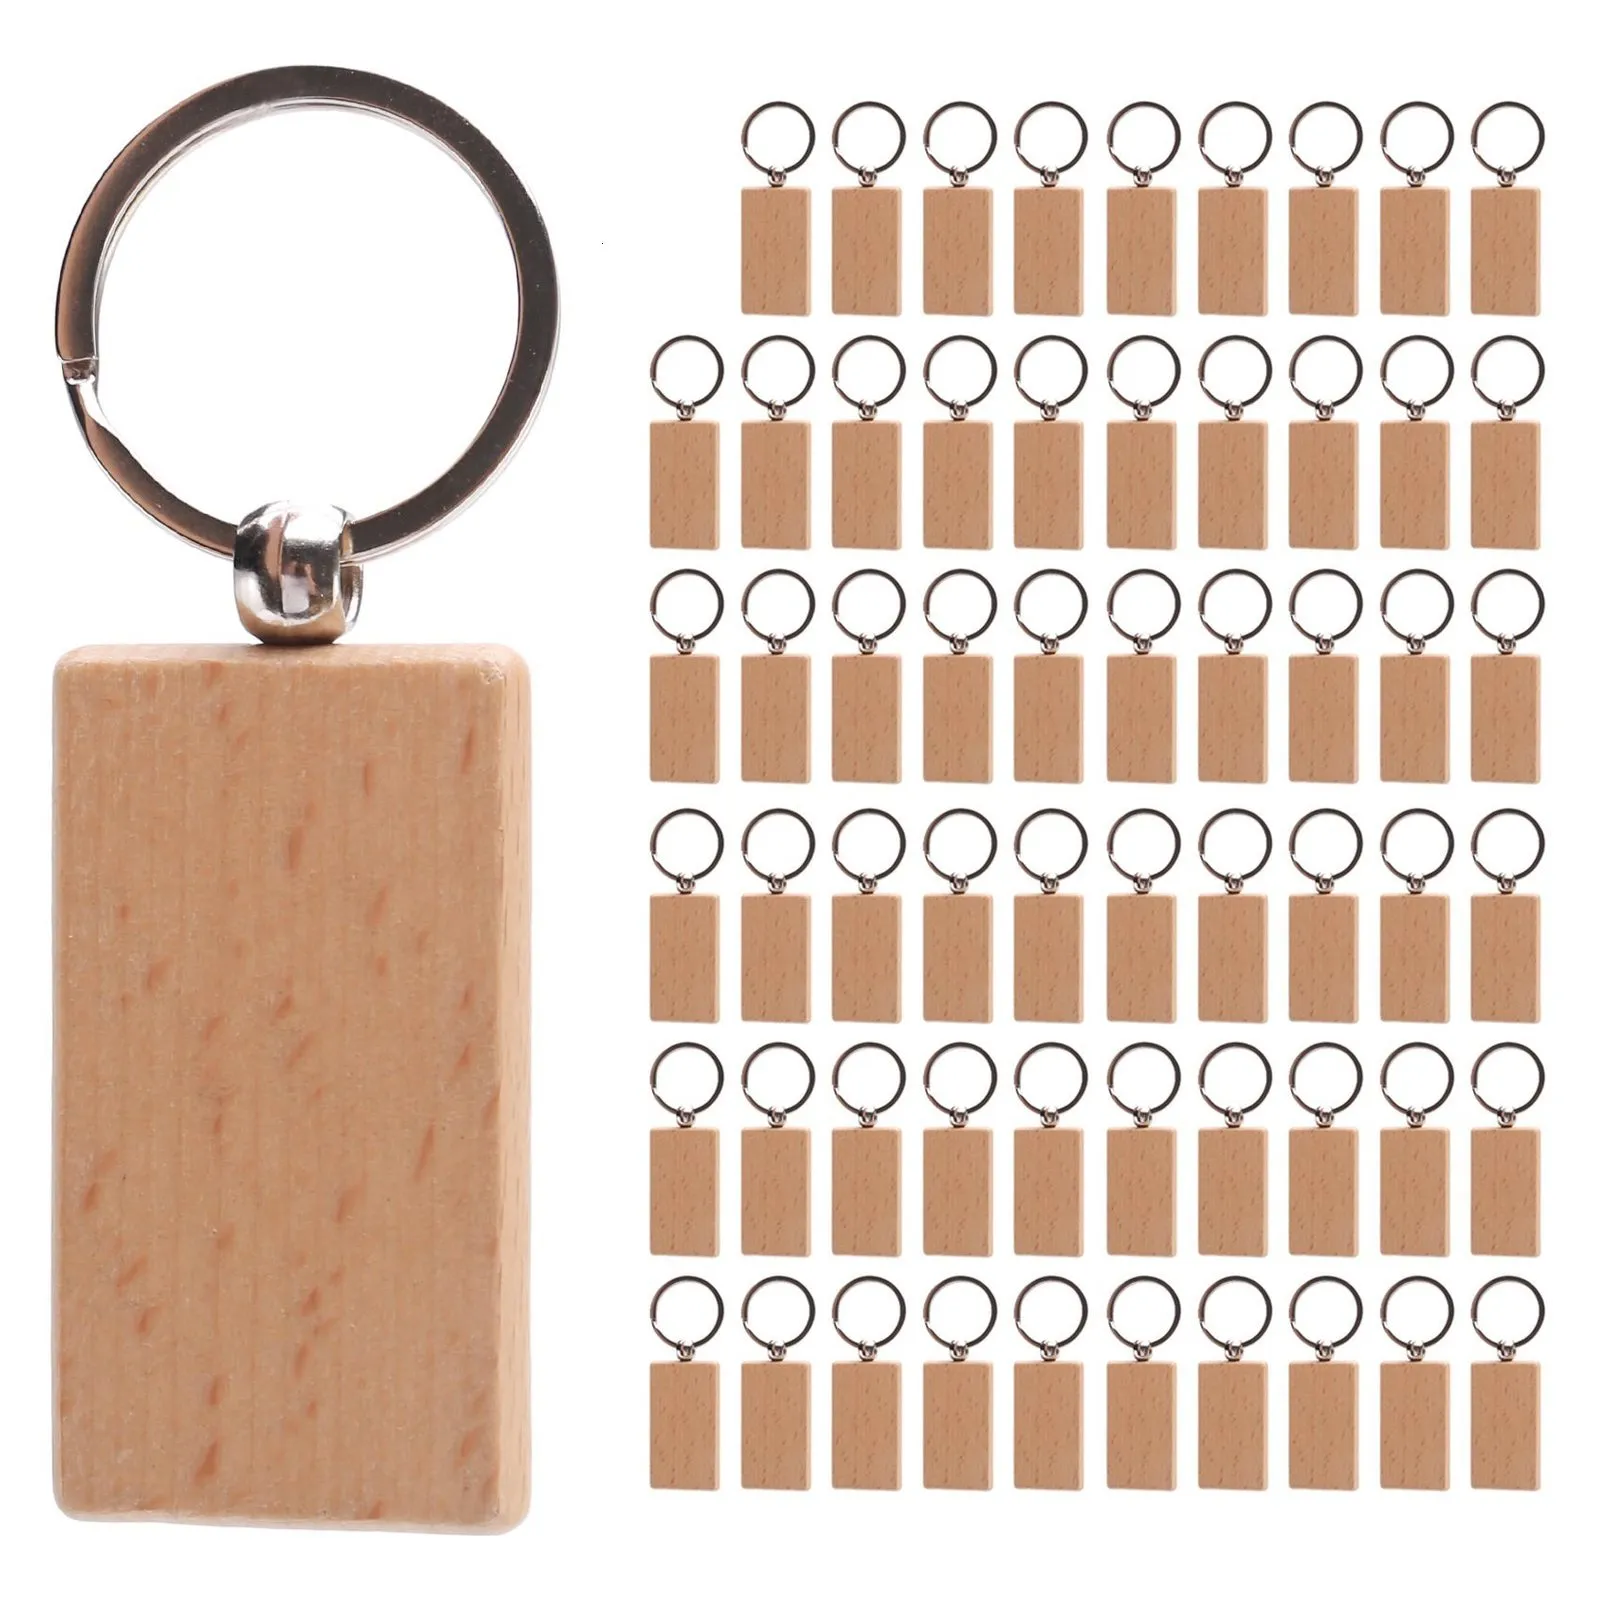 Advertising display equipment 60Pcs Blank Rectangle Wooden Key Chain Diy Wood Keychains Key Tags Can Engrave Diy Gifts 221130